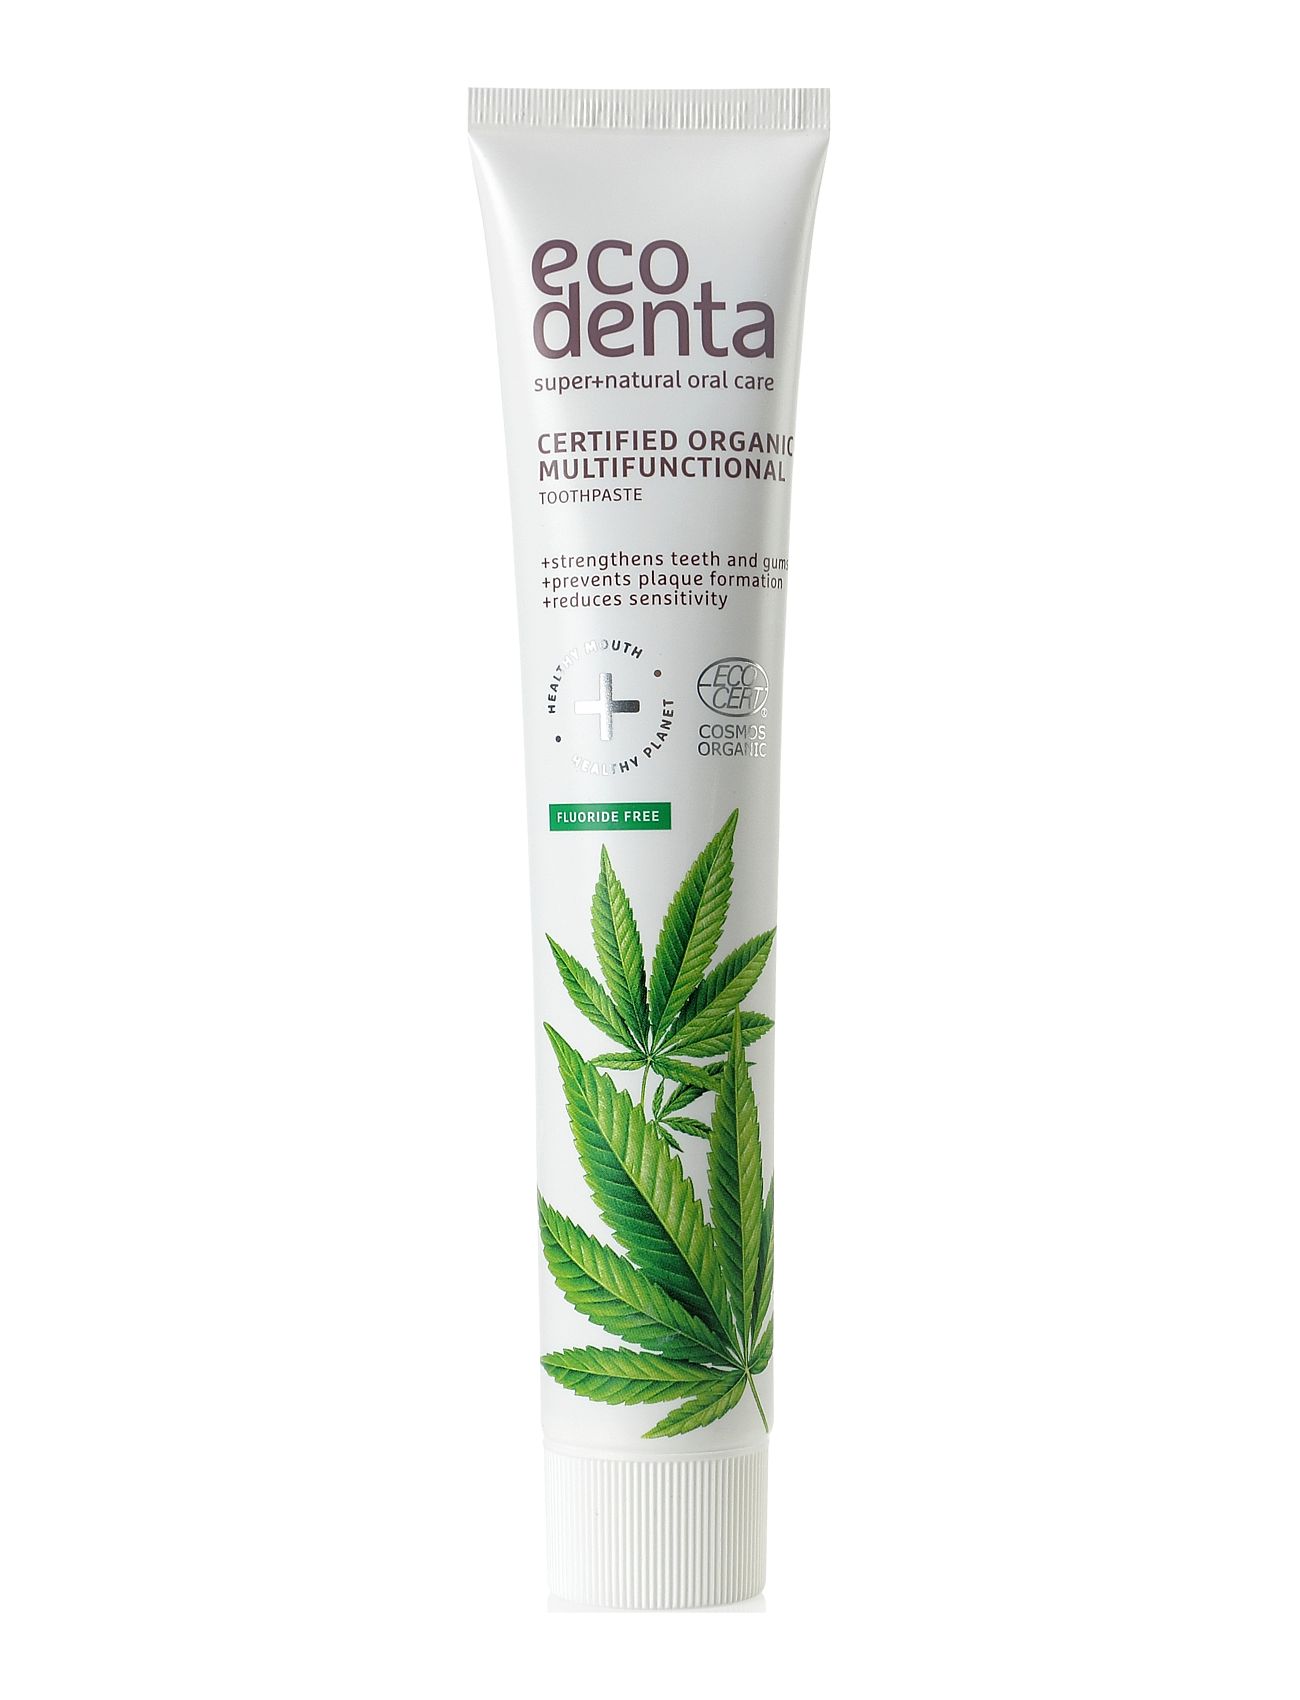 Ecodenta Certified Organic Multifunctional Toothpaste With Hemp Seed Oil 75 Ml Beauty Women Home Oral Hygiene Toothpaste Nude Ecodenta